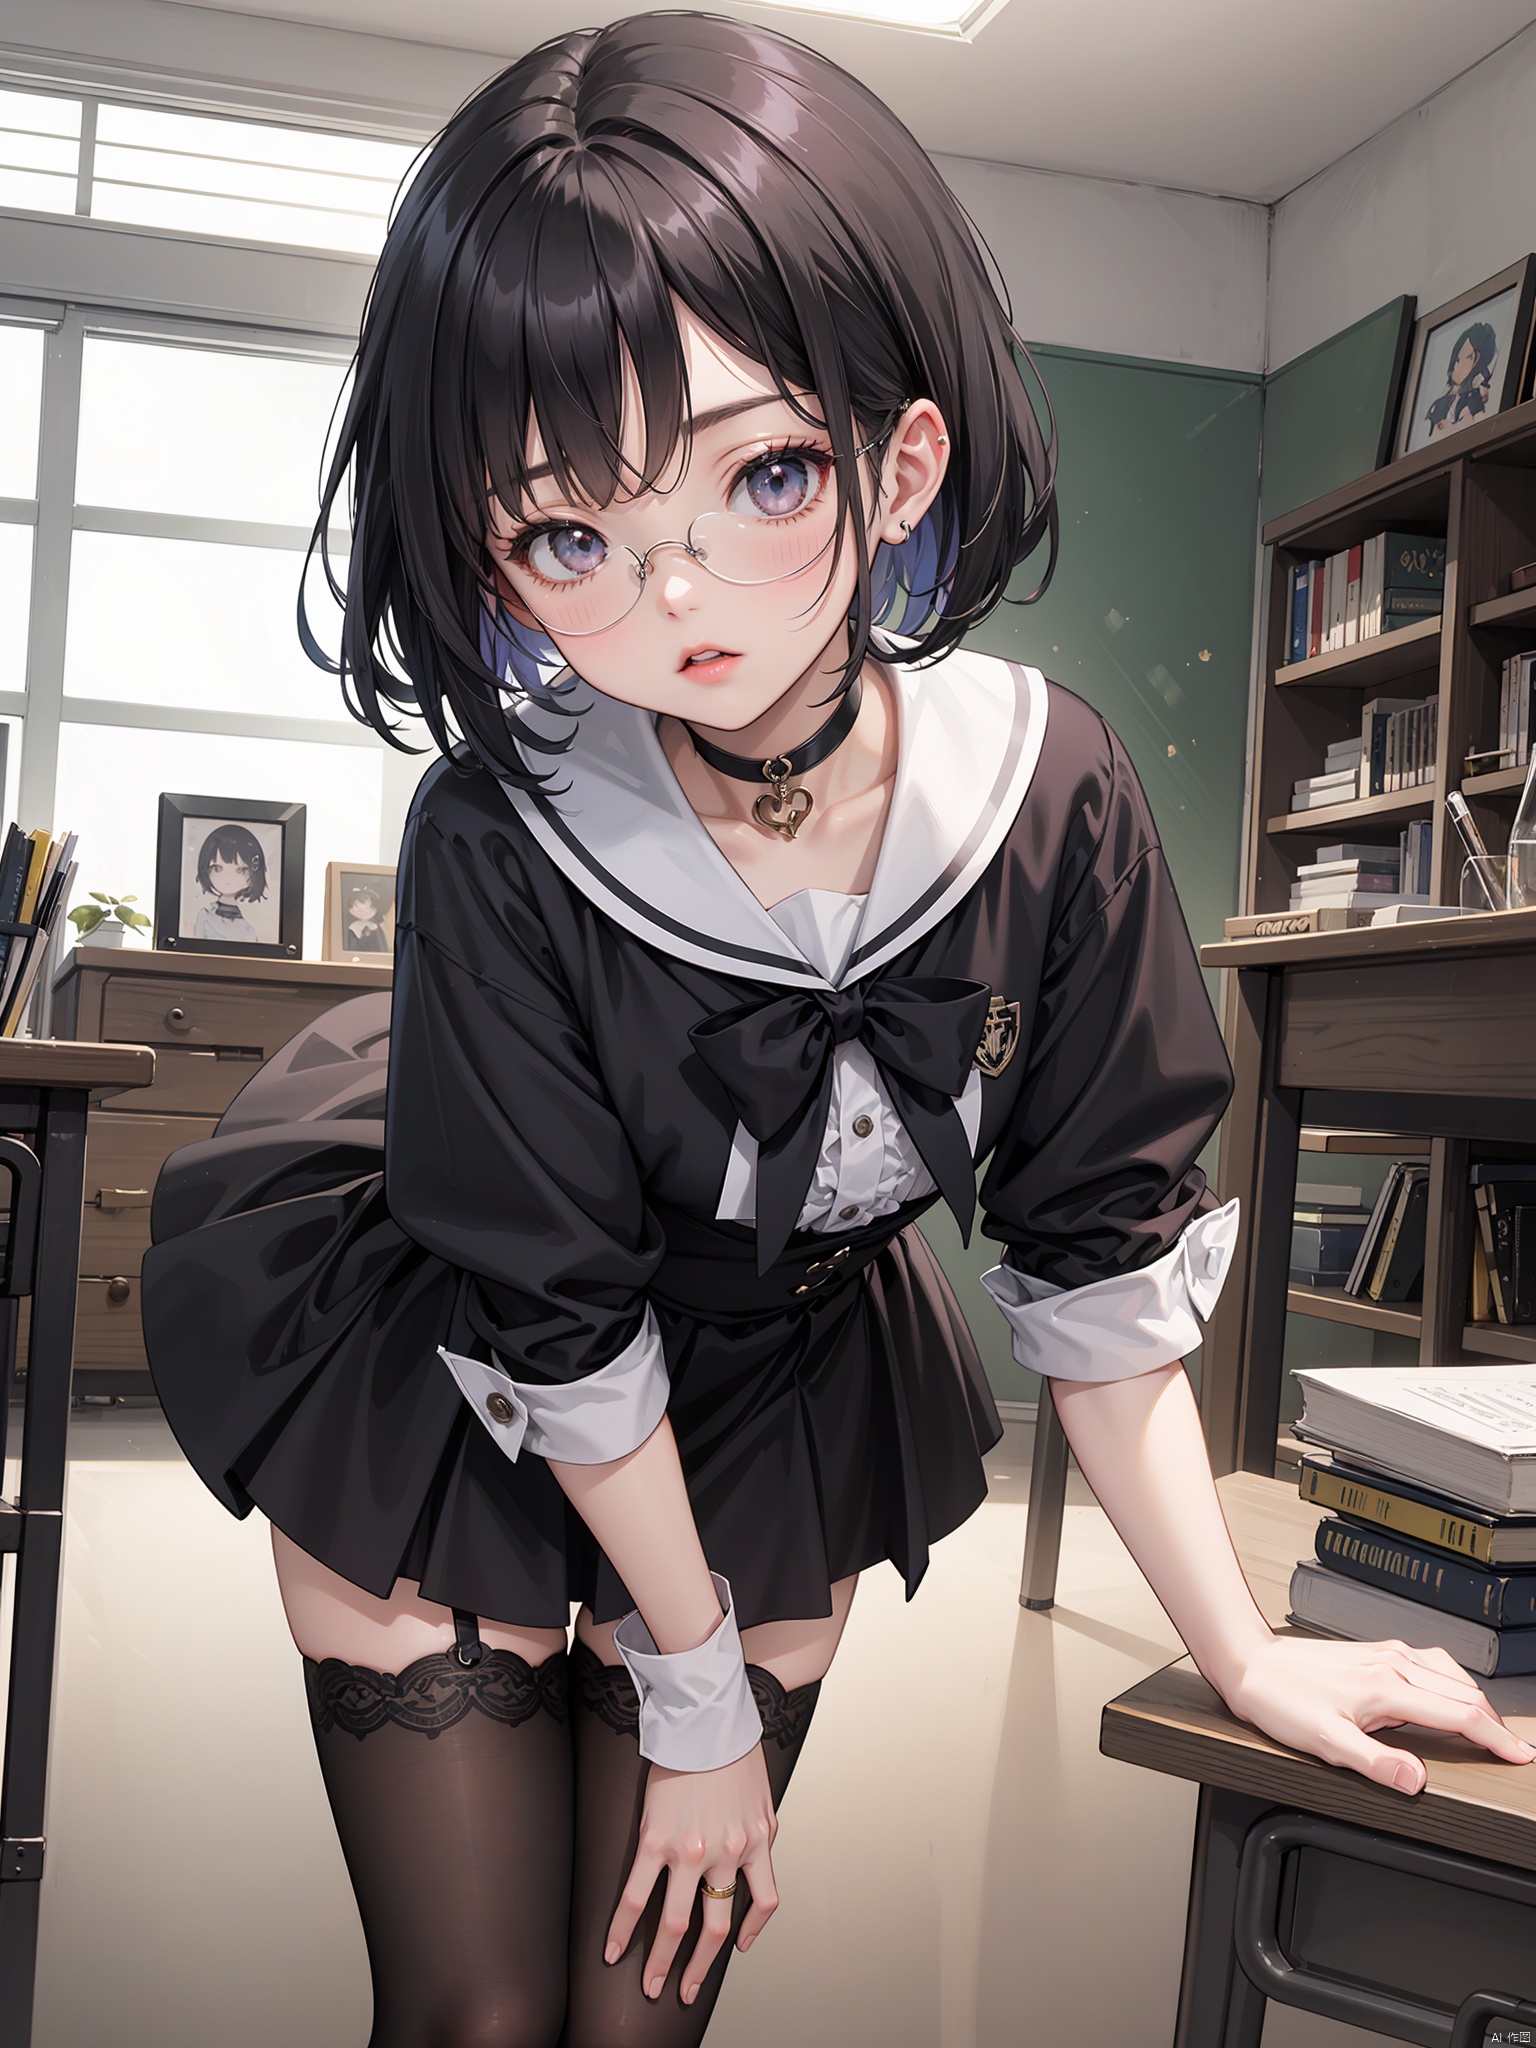  Big chest, bent down, revealing waist, school uniform, flesh colored stockings, mature senior sister, gradient long hair, in front of the desk, ultra-high picture quality, noble, masterpiece, dynamic angle, golden glasses，Beautiful girl,goth,short hair,black hair,dark eyes,lolita dress,gothic choker,intricate details,volumetric light,anime style